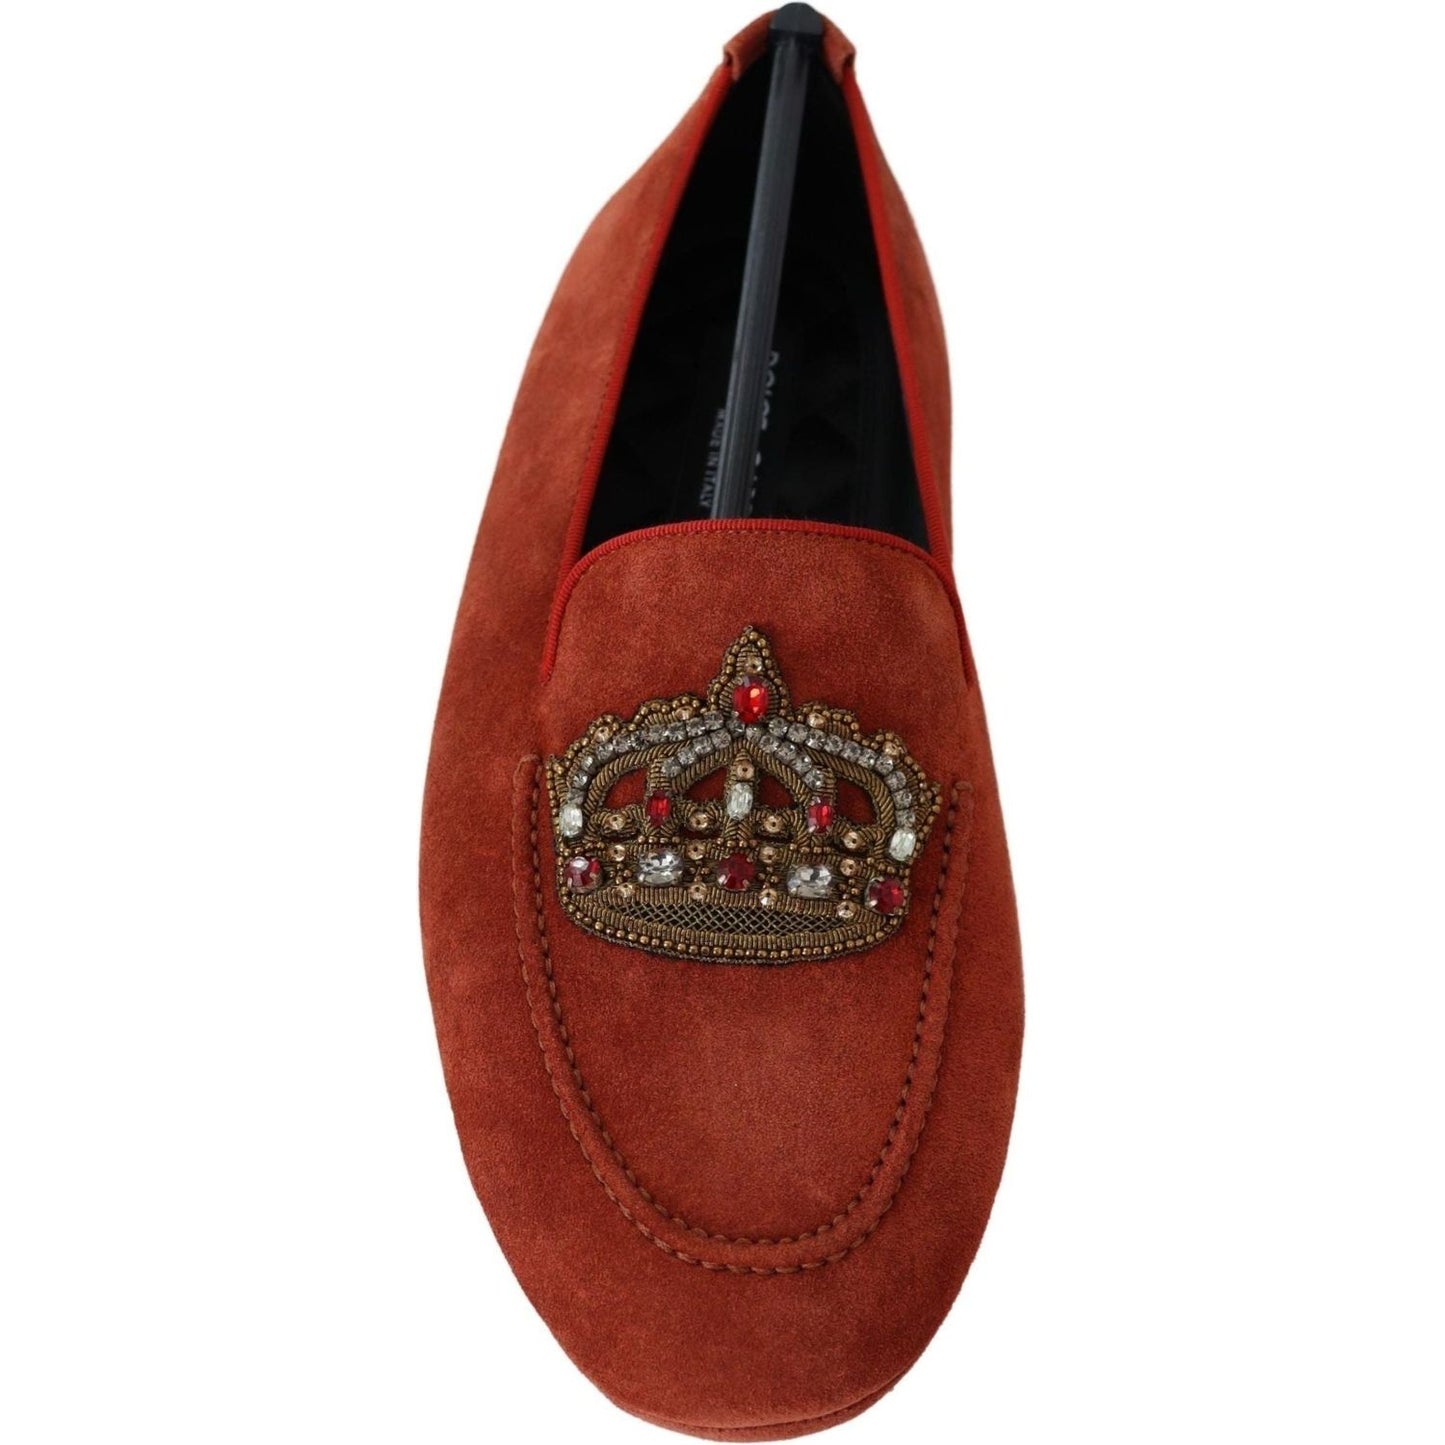 Dolce & Gabbana Opulent Orange Leather Loafers with Gold Embroidery orange-leather-crystal-crown-loafers-shoes IMG_5419-scaled-a89a28c5-5a0.jpg